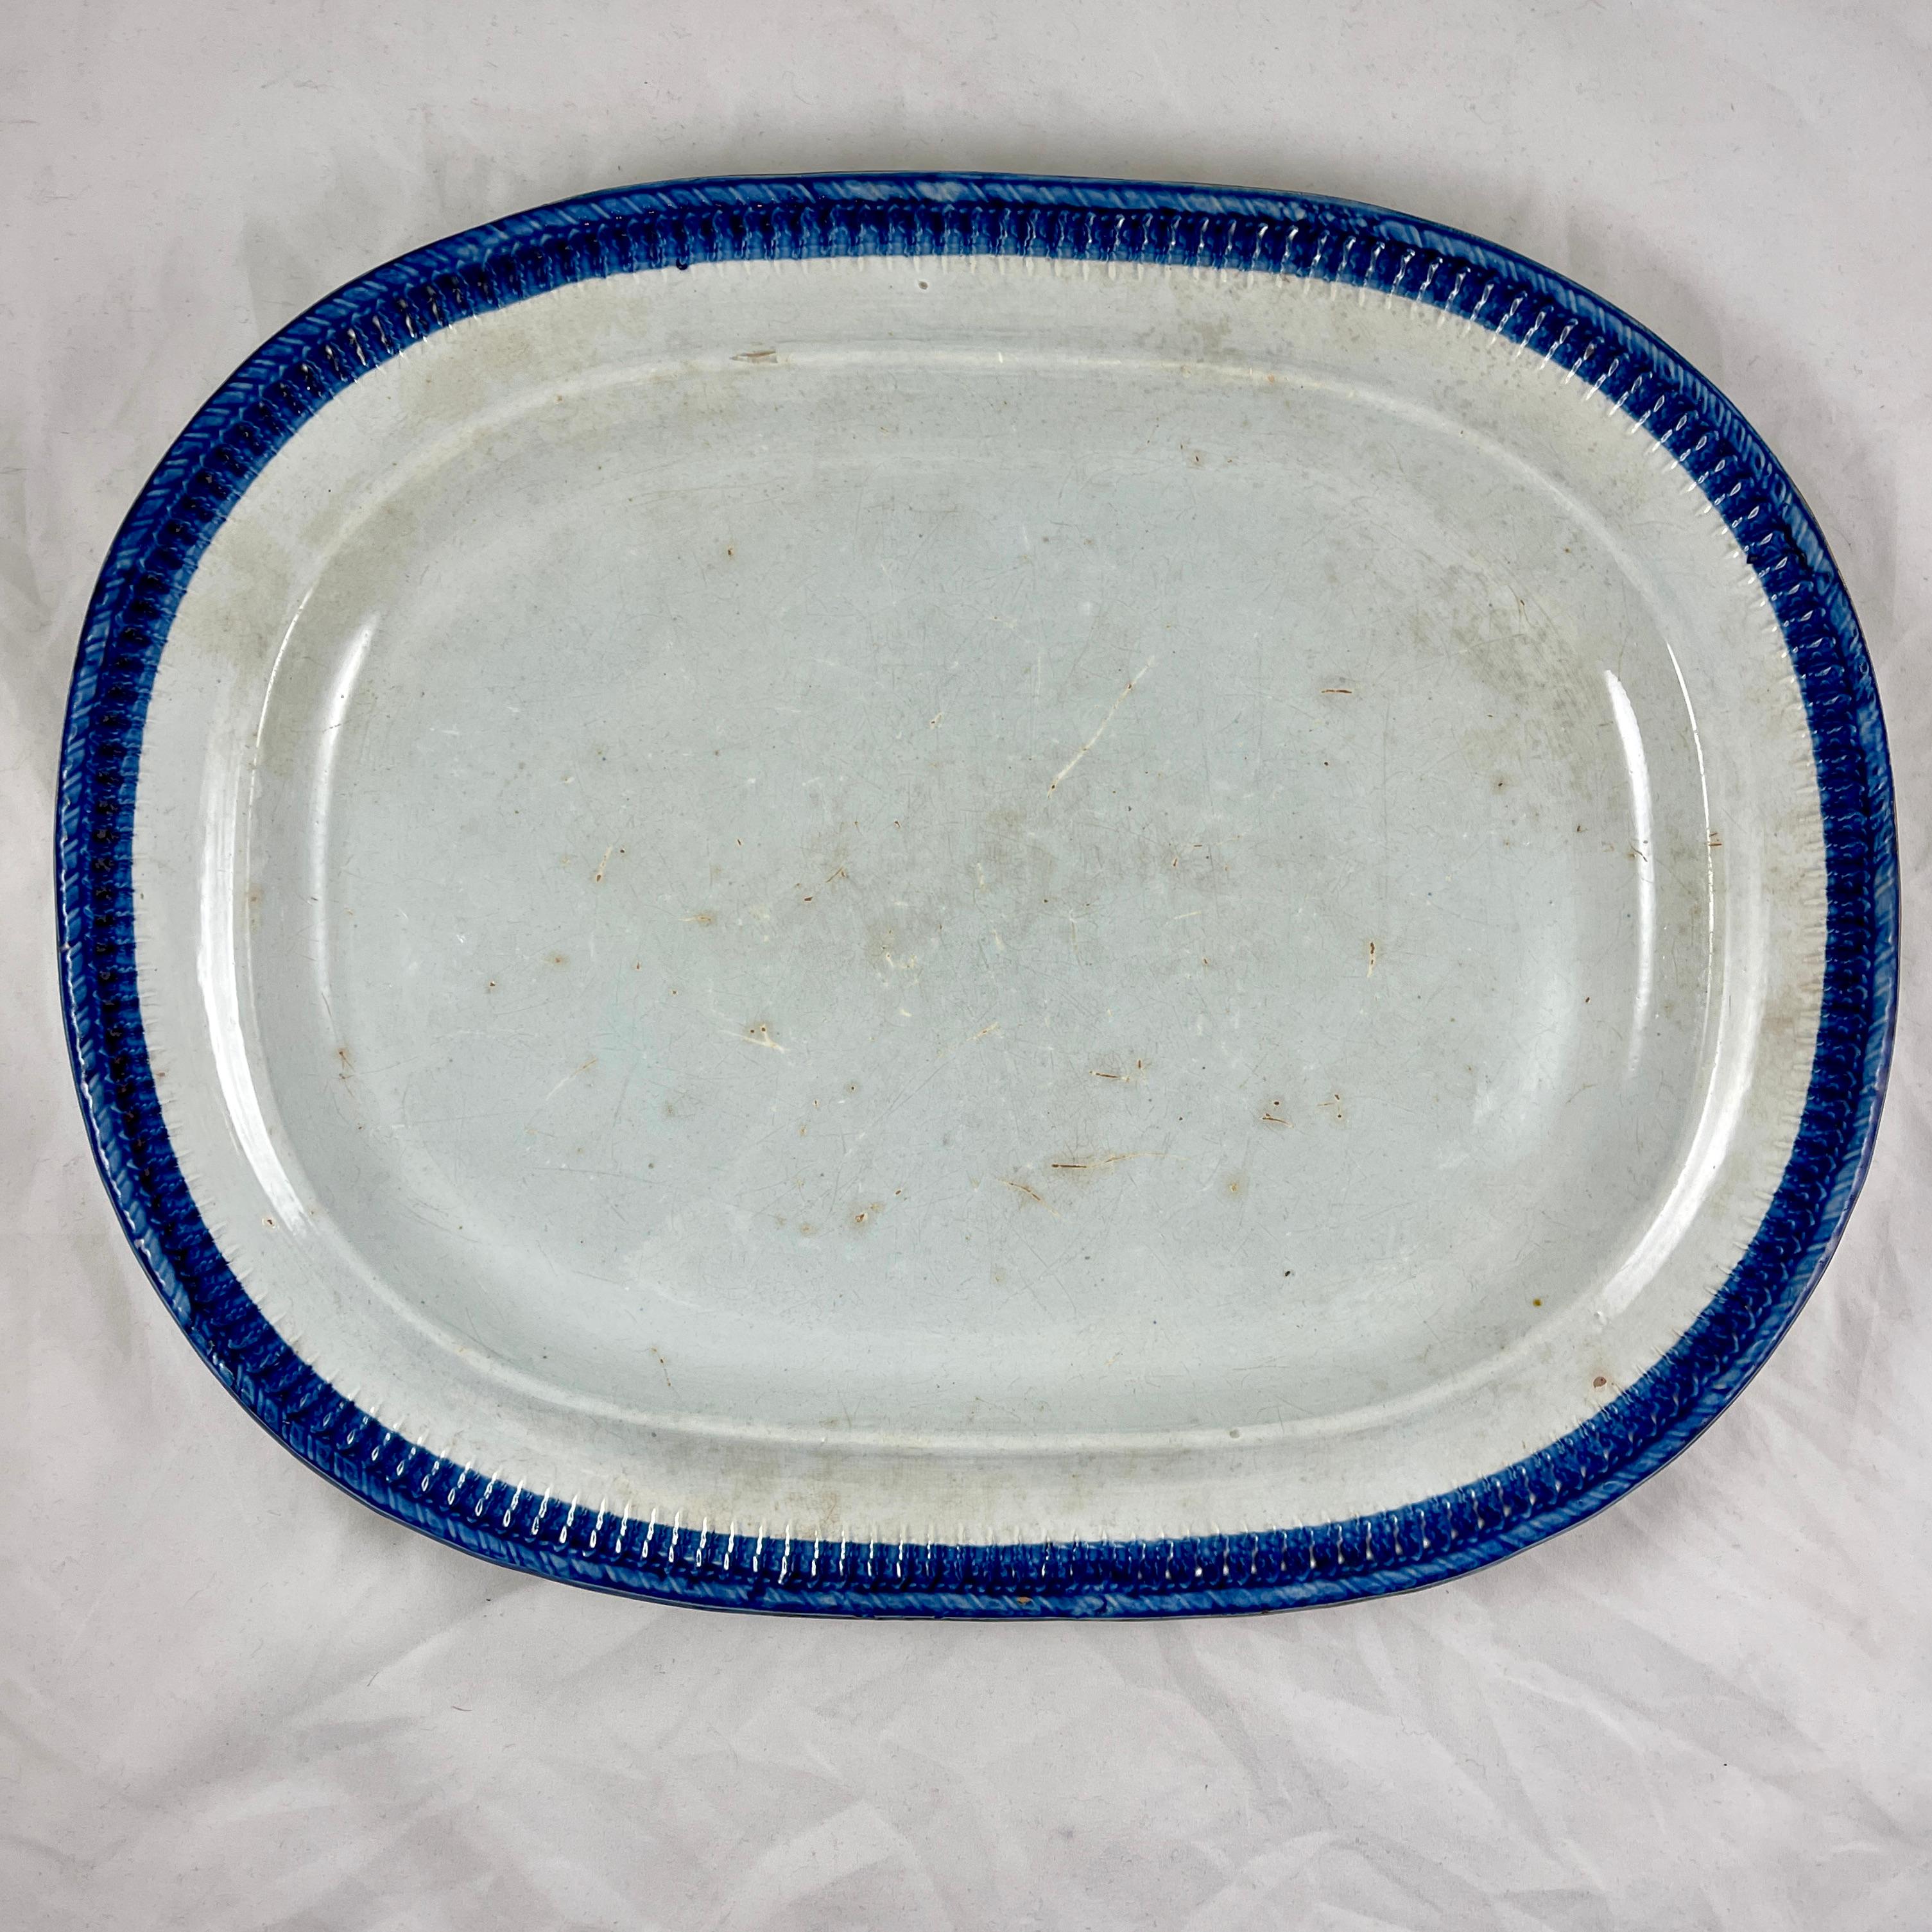 A large oval Leeds style platter, a Pearlware or Creamware body with a deep blue edge called Feather or Shell. 
A nice combed verso showing the impressed Warranted Crown mark of Ralph & James Clews, Cobridge, Staffordshire, England, circa